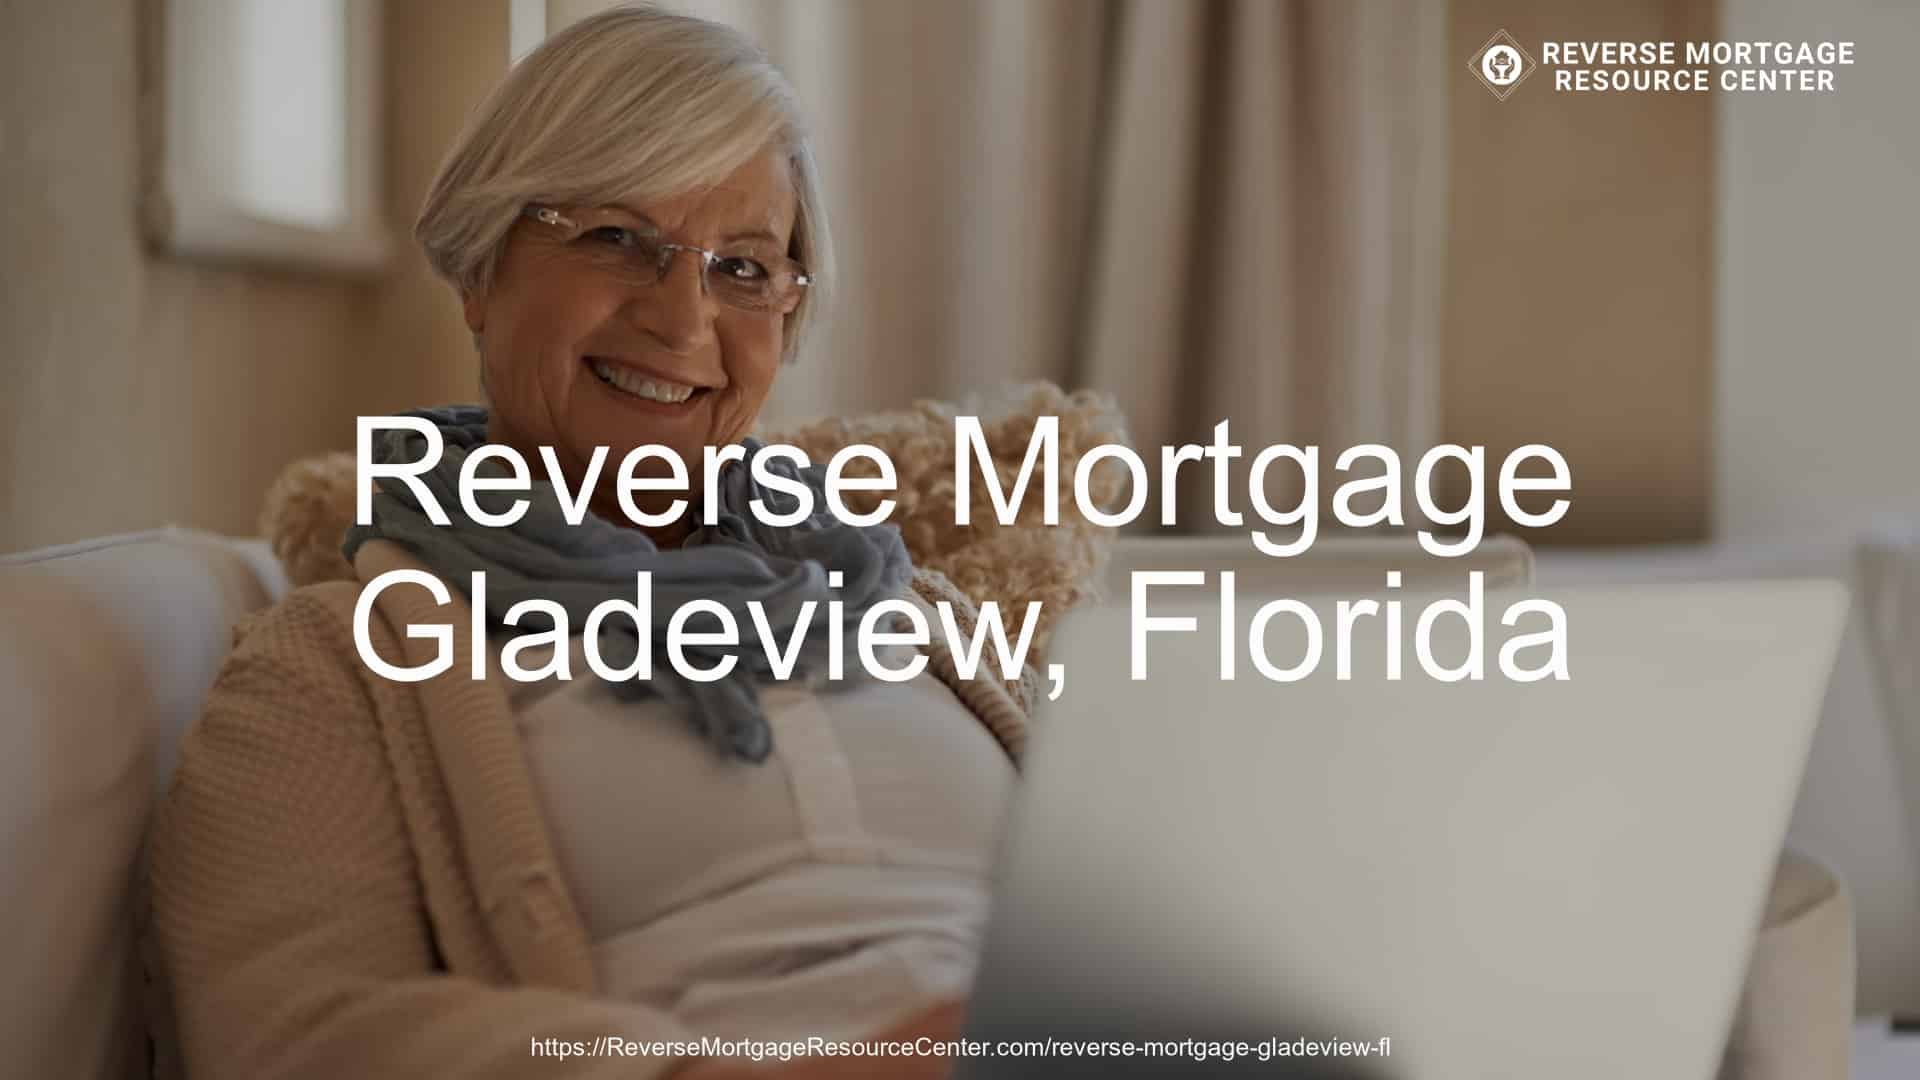 Reverse Mortgage in Gladeview, FL